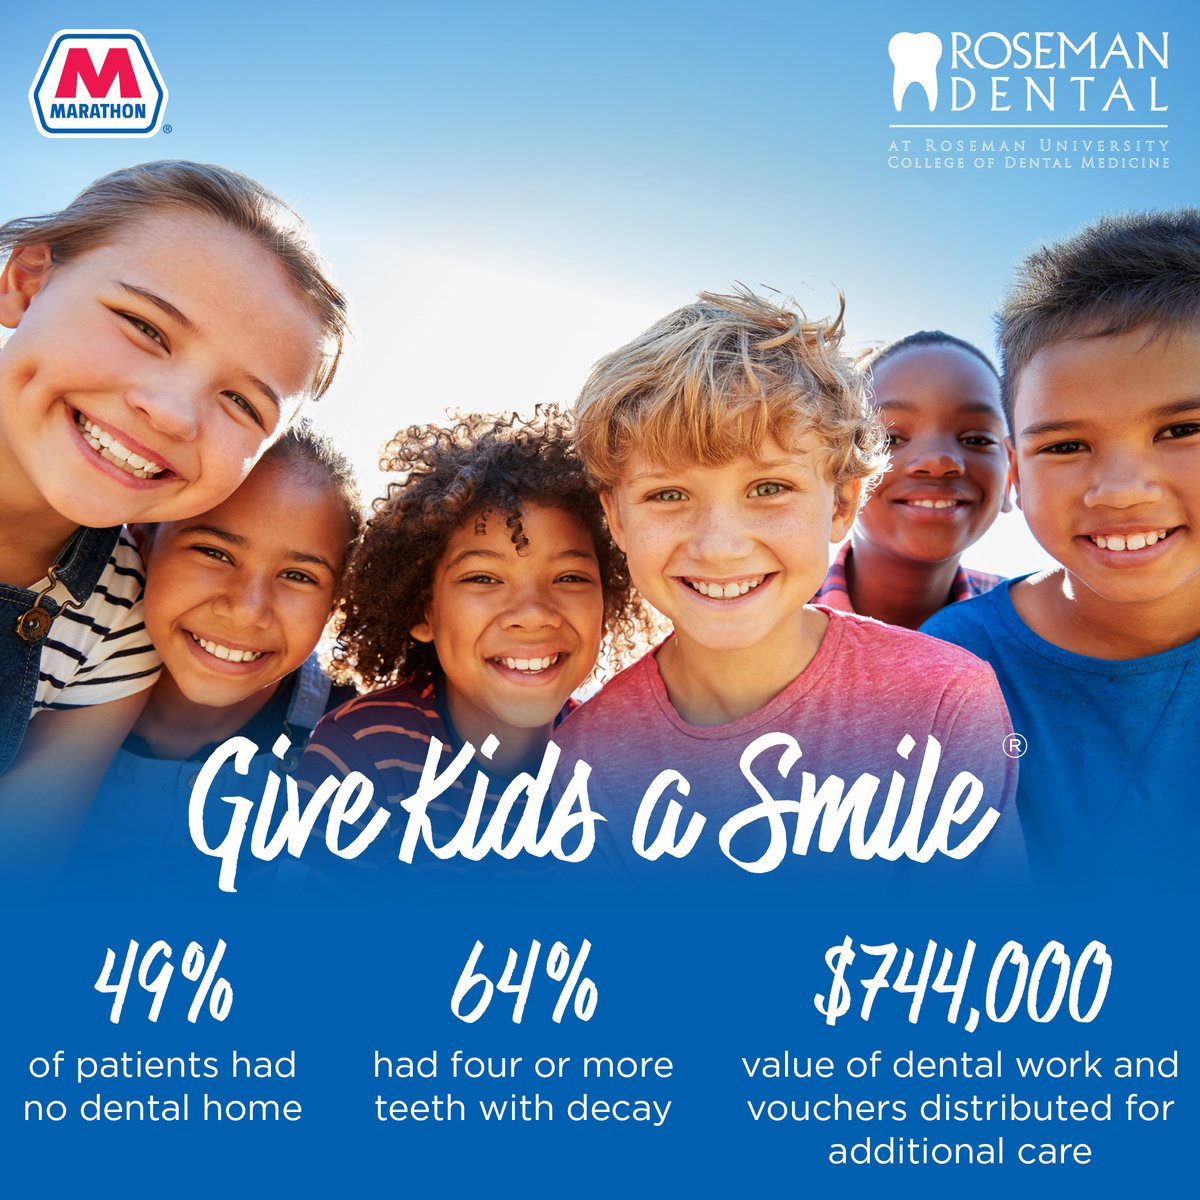 On World Oral Health Day, we acknowledge the great work of the College of Dental Medicine at Roseman University of Health Sciences in Utah. In February, the school used funding from our Salt Lake City refinery to provide free dental cleanings and screenings to 827 children and…